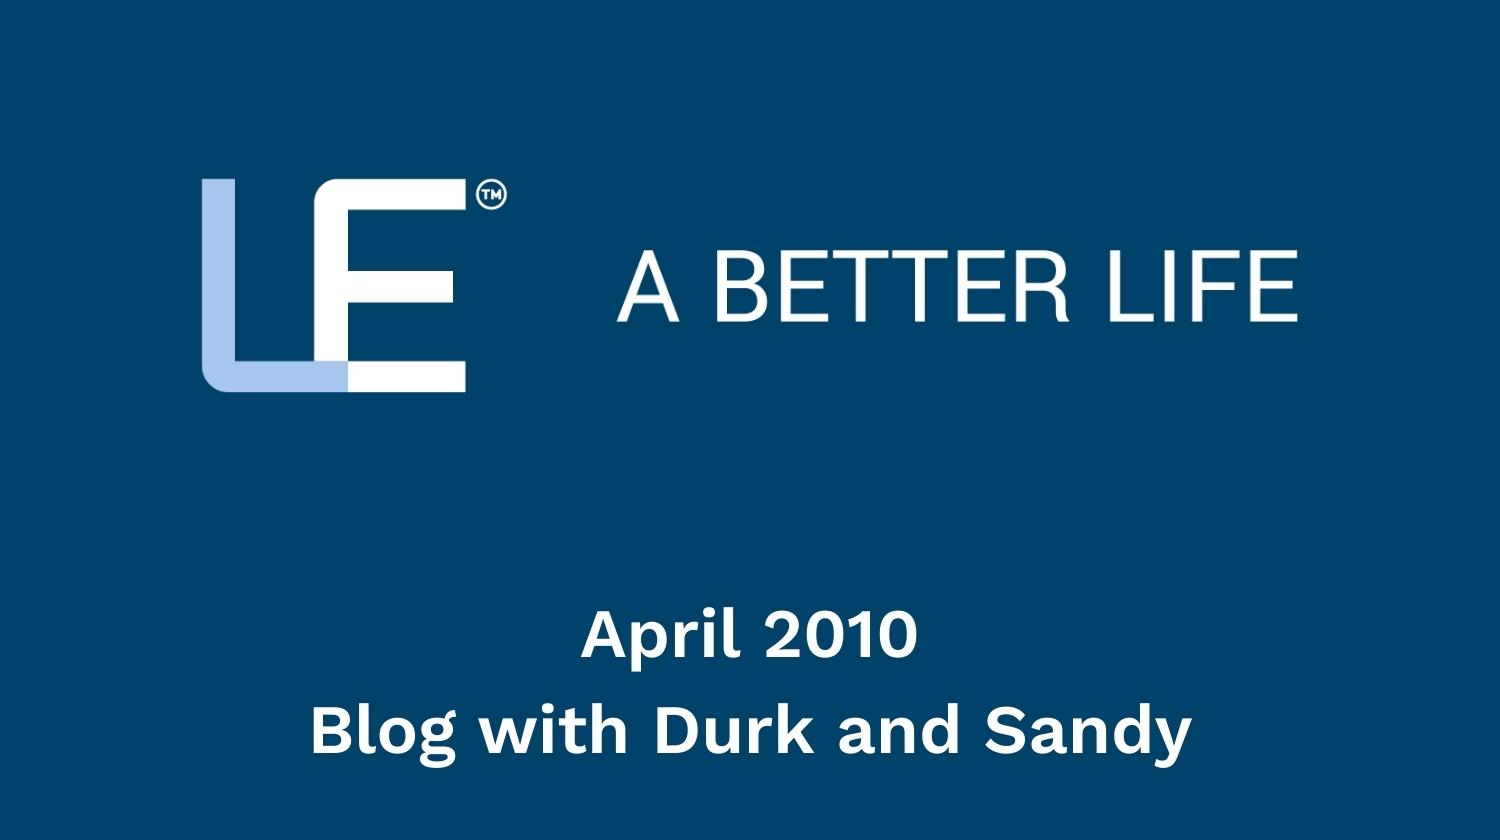 April 2010 Blog with Durk and Sandy